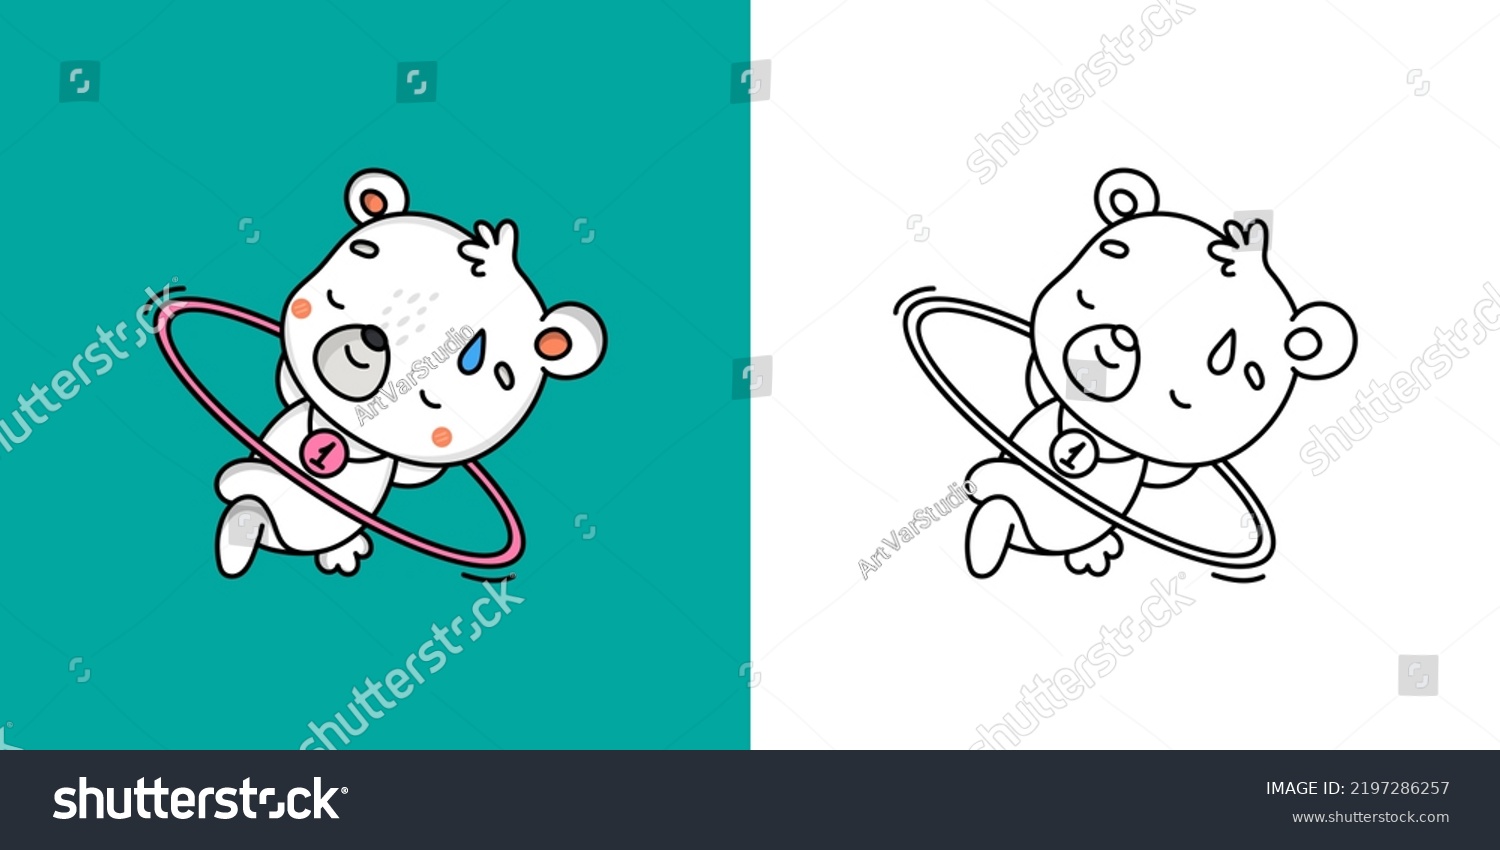 SVG of Clipart Bear Athlete Multicolored and Black and White. Cute Panda Polar Bear Sportsman. Vector Illustration of a Kawaii Animal for Stickers, Baby Shower, Coloring Pages, Prints for Clothes.
 svg